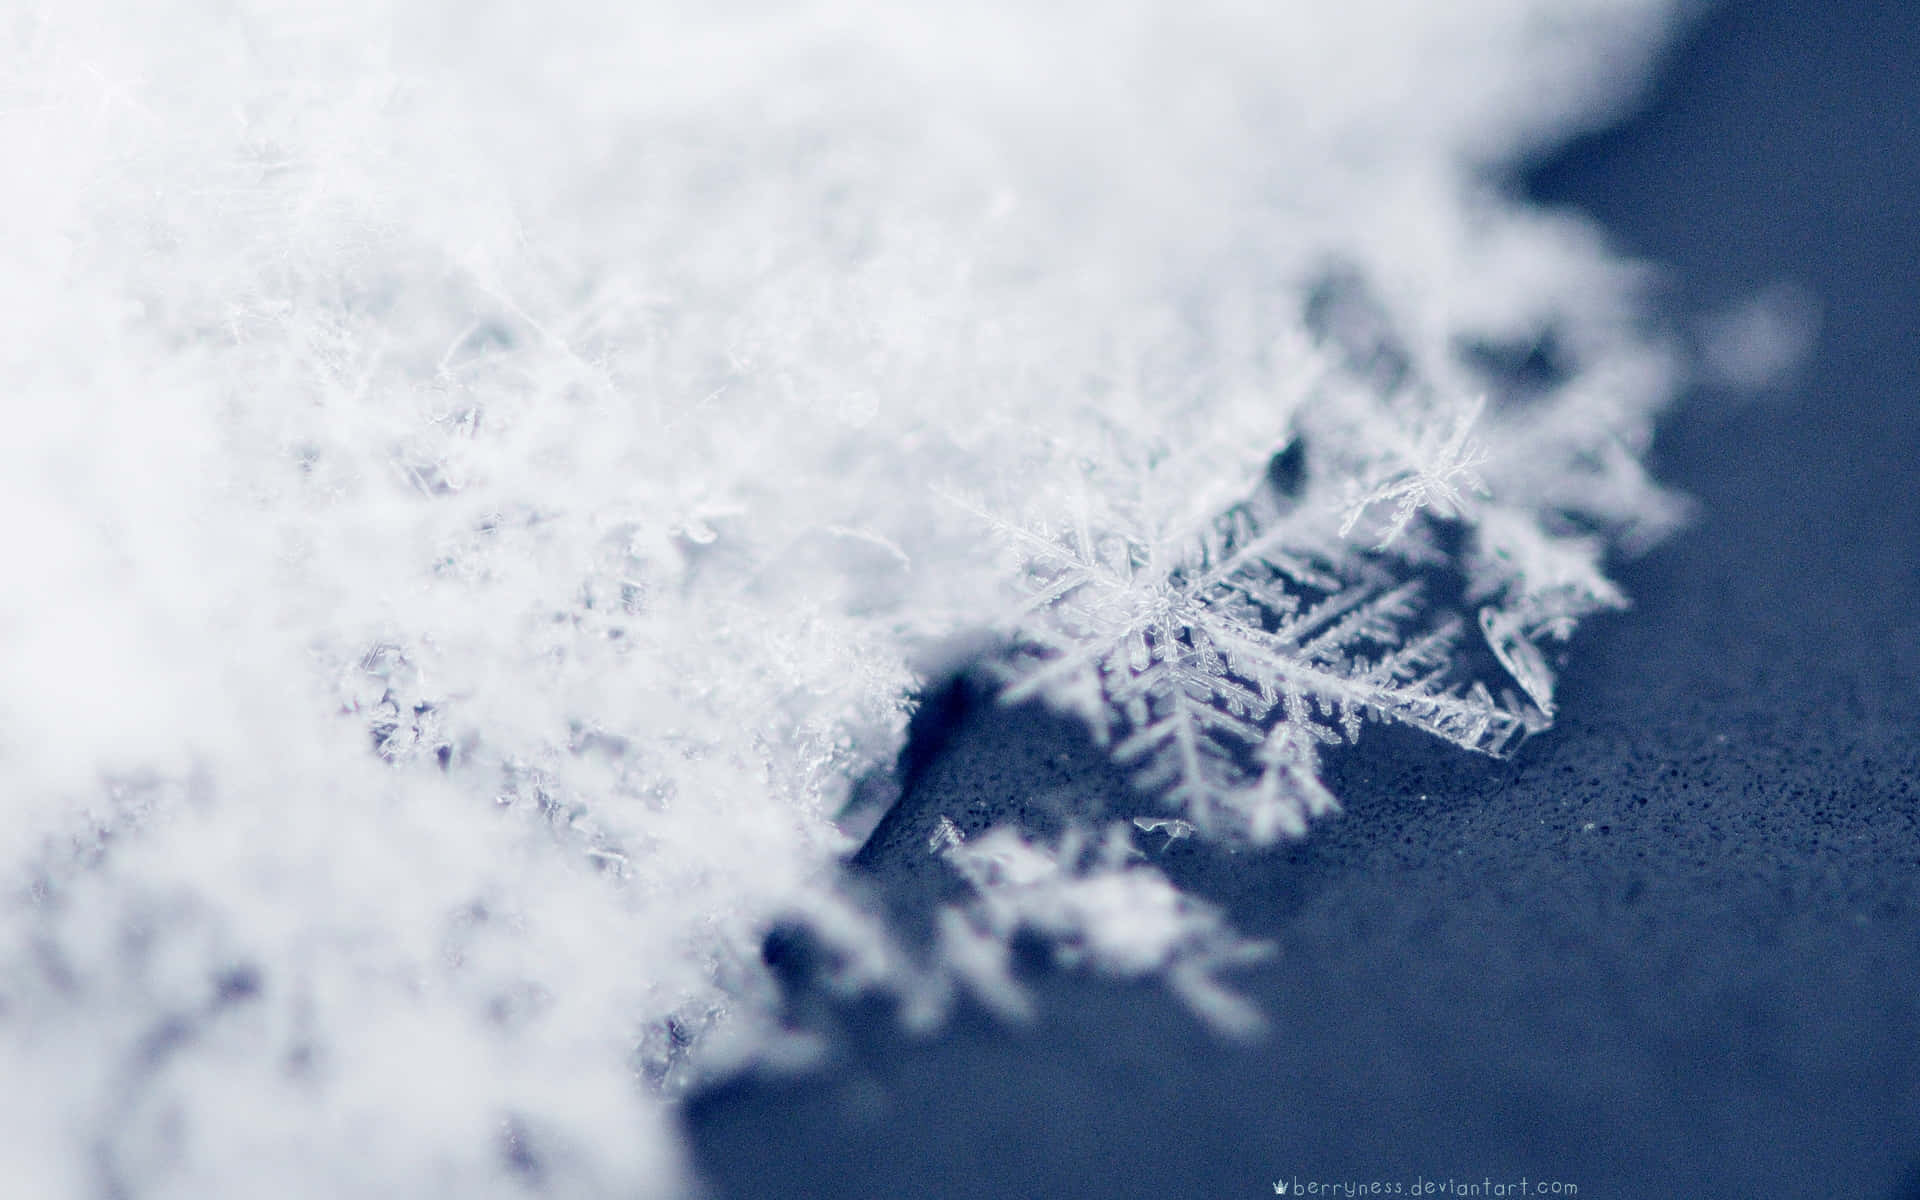 Enjoy winter's beauty with a view of a beautiful snowflake in a snow-covered landscape.